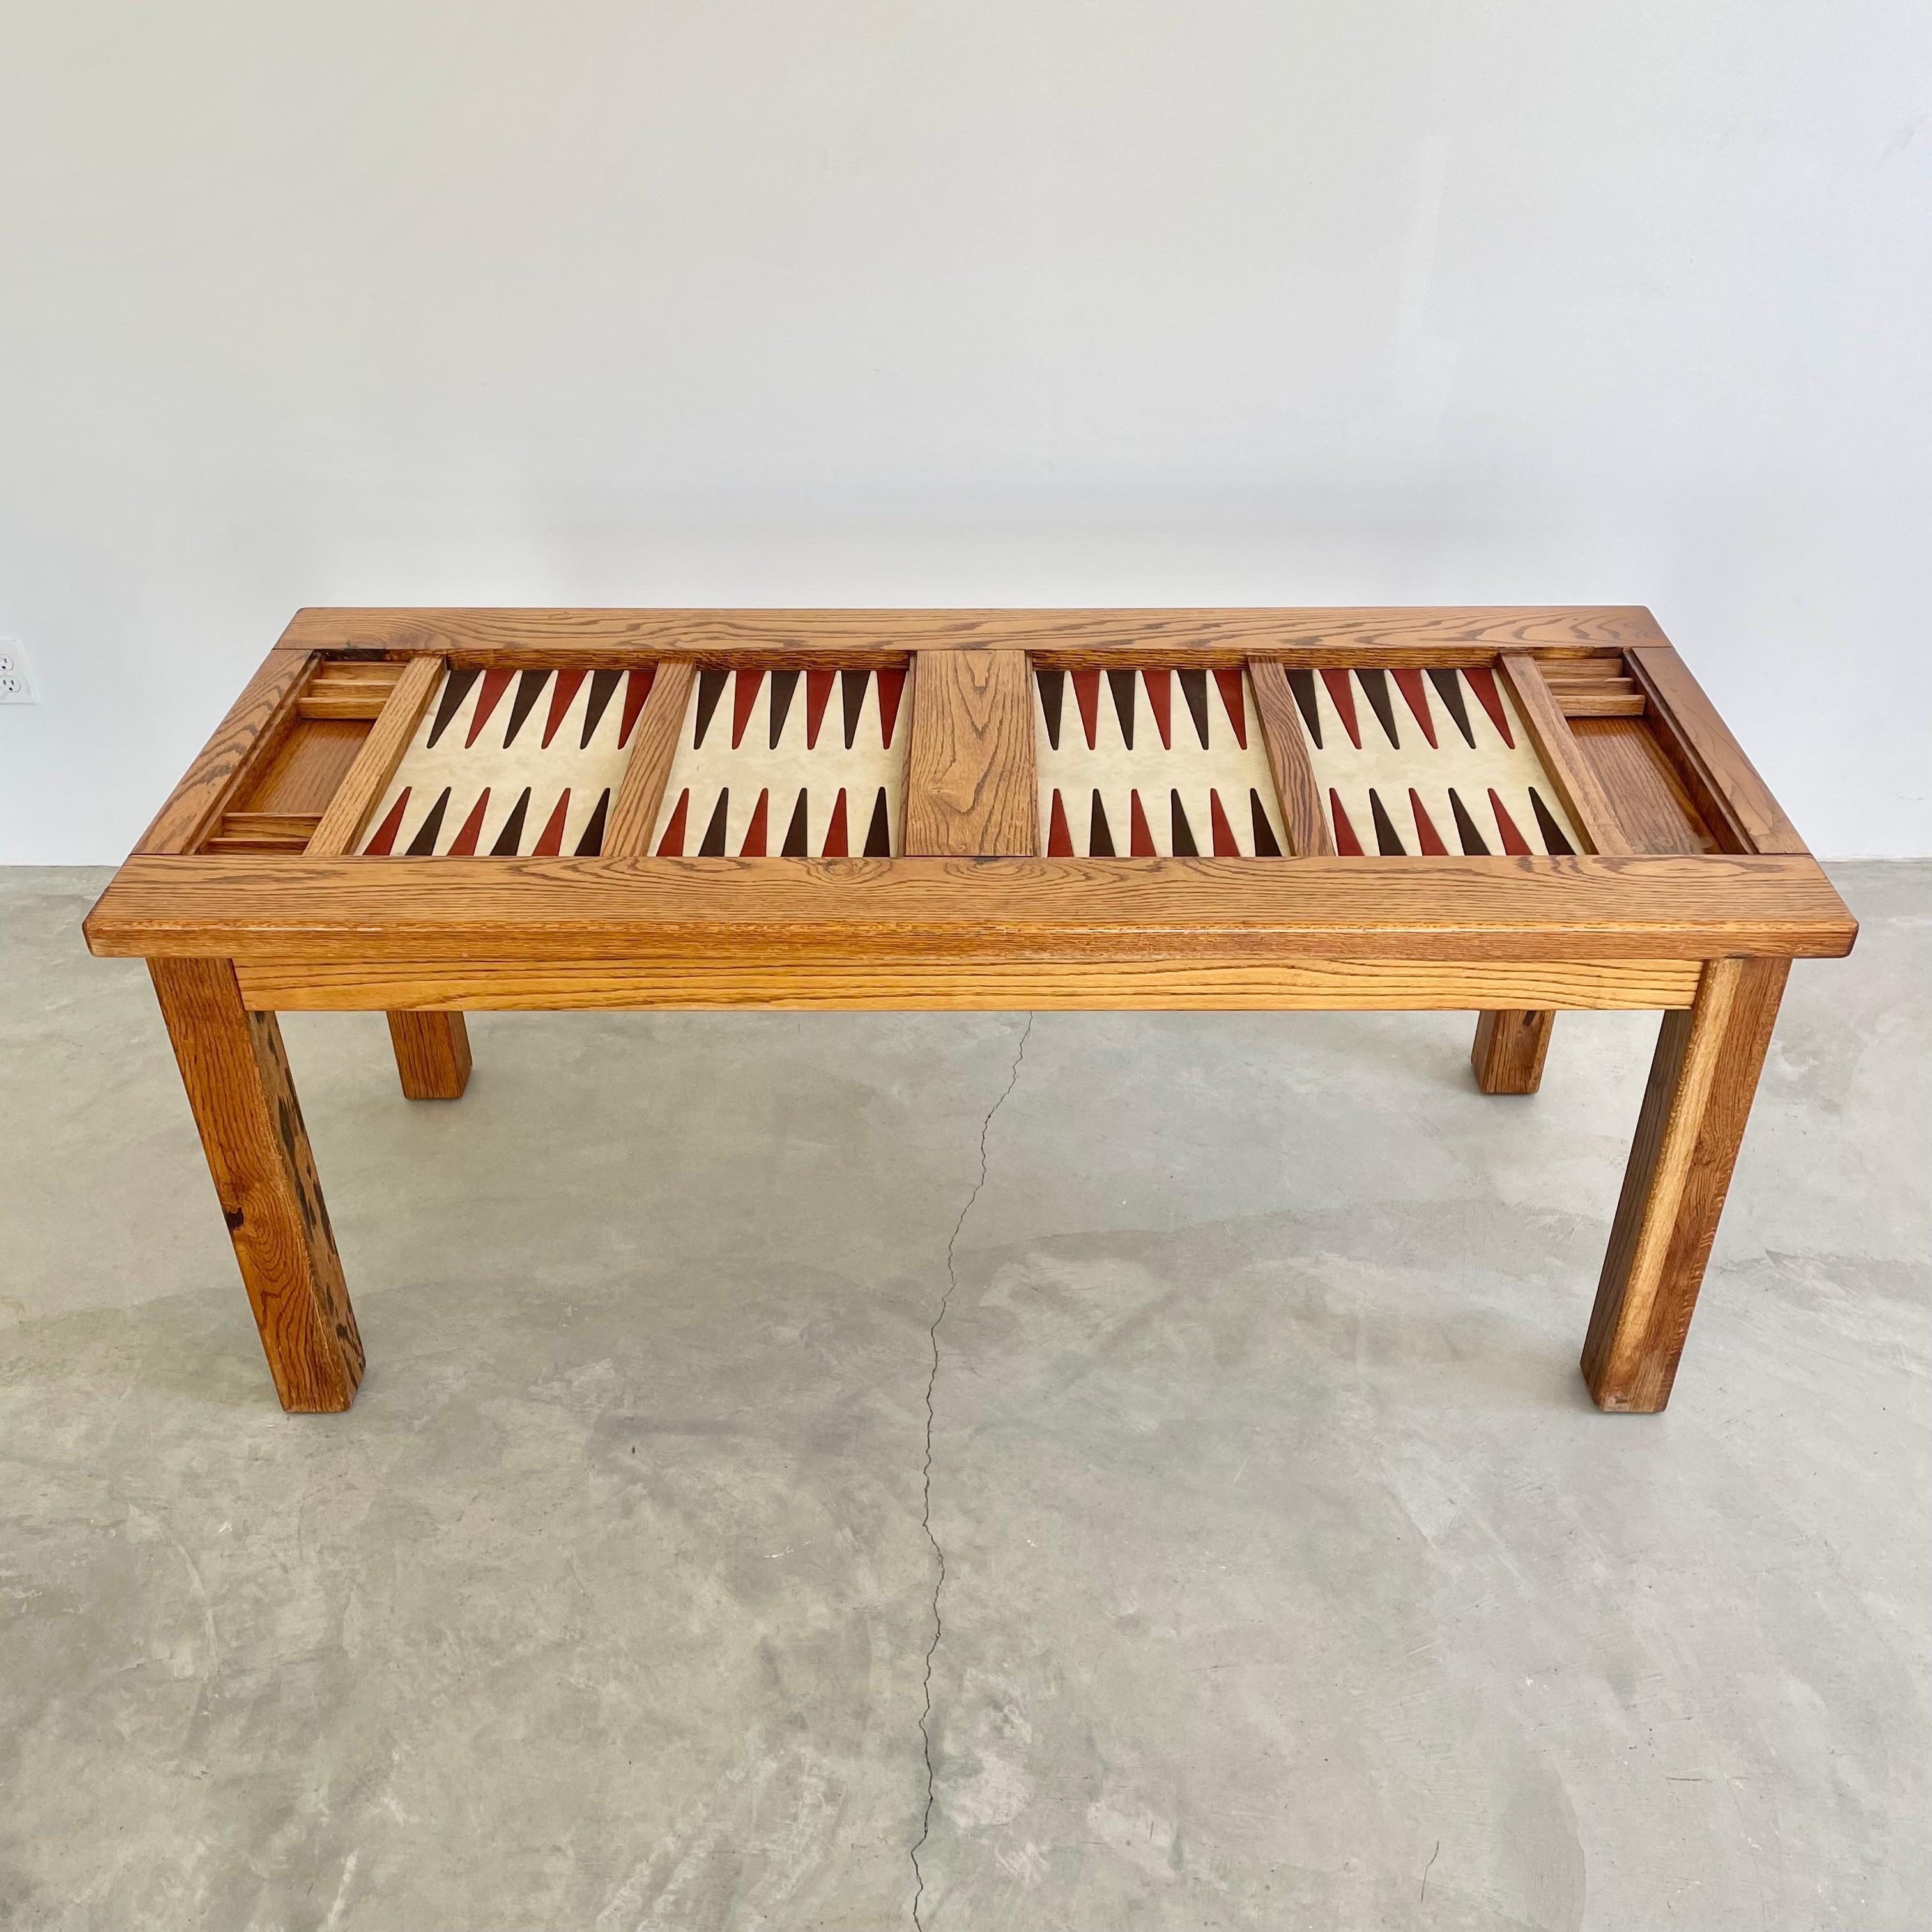 Classic oak and suede backgammon table. Unusual in that it has two playing fields. Playing surface is a cream suede with alternating burgundy and dark brown suede triangles. Chic color scheme and presence. Each side has wooden chip holders and dice